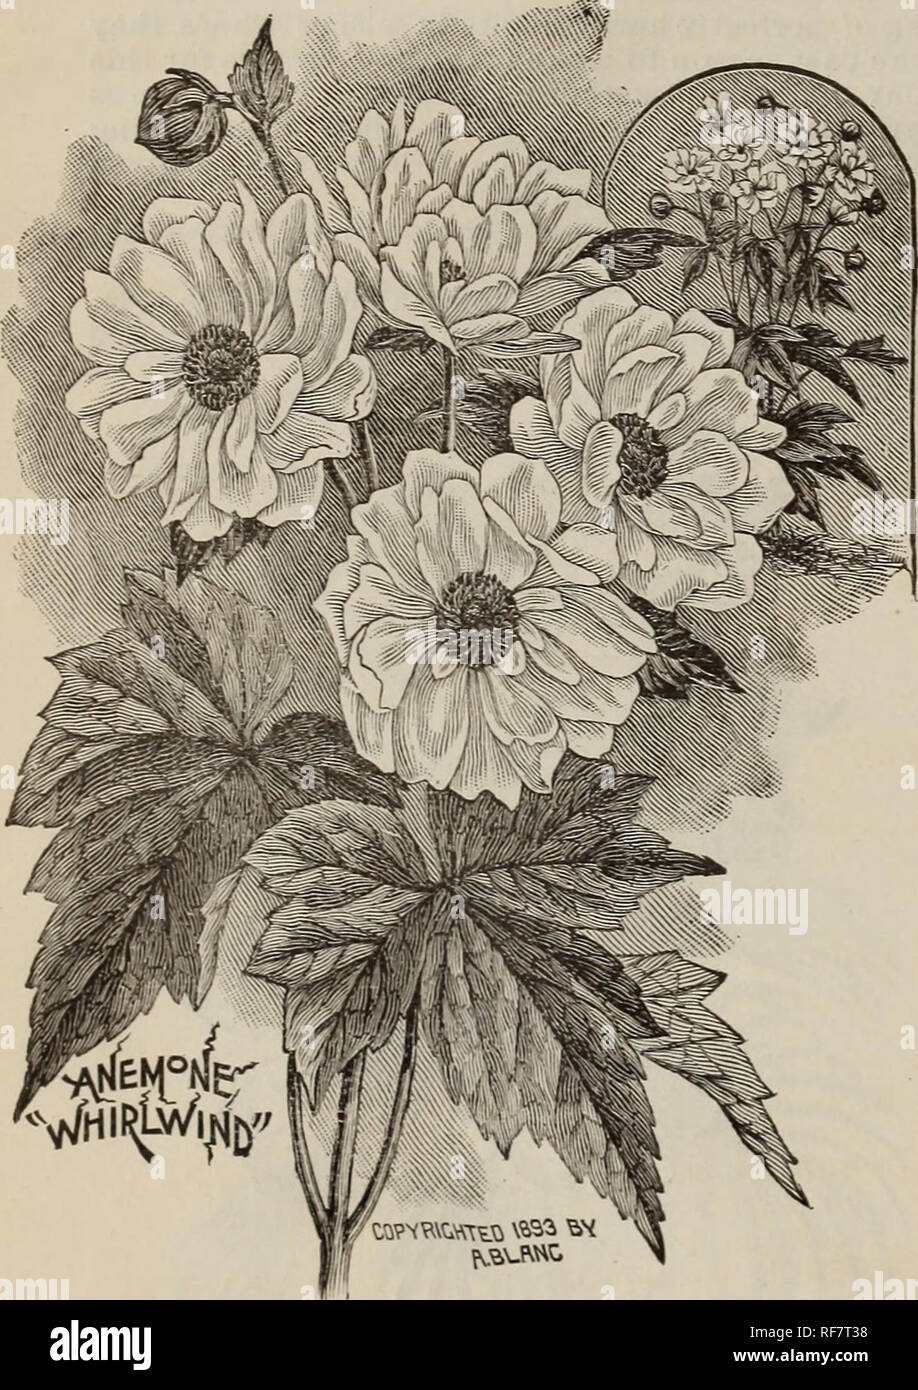 . Rhododendrons, roses, clematis, azaleas, bulbs, hardy plants, bay trees, evergreens : palms, araucarias, ferns, vines, orchids, flowering shrubs, ornamental grasses and trees. Nursery stock New Jersey Rutherford Catalogs; Bulbs (Plants) Catalogs; Flowers Seeds Catalogs; Plants, Ornamental Catalogs. 34 BOBBINK &amp; ATKINS, BUTHEBFOKD, N. J. AMSONIA Tabernaemontana. A strong shrubby plant, with dense trimmed spikes of delicate blue flowers. 20 cts. each; S2.00 per doz. ANEMONES (Wildflower) Japanese varieties; the most useful autumnal cut flower. A. Japonica alba. Pure white. A. J. elegans. C Stock Photo